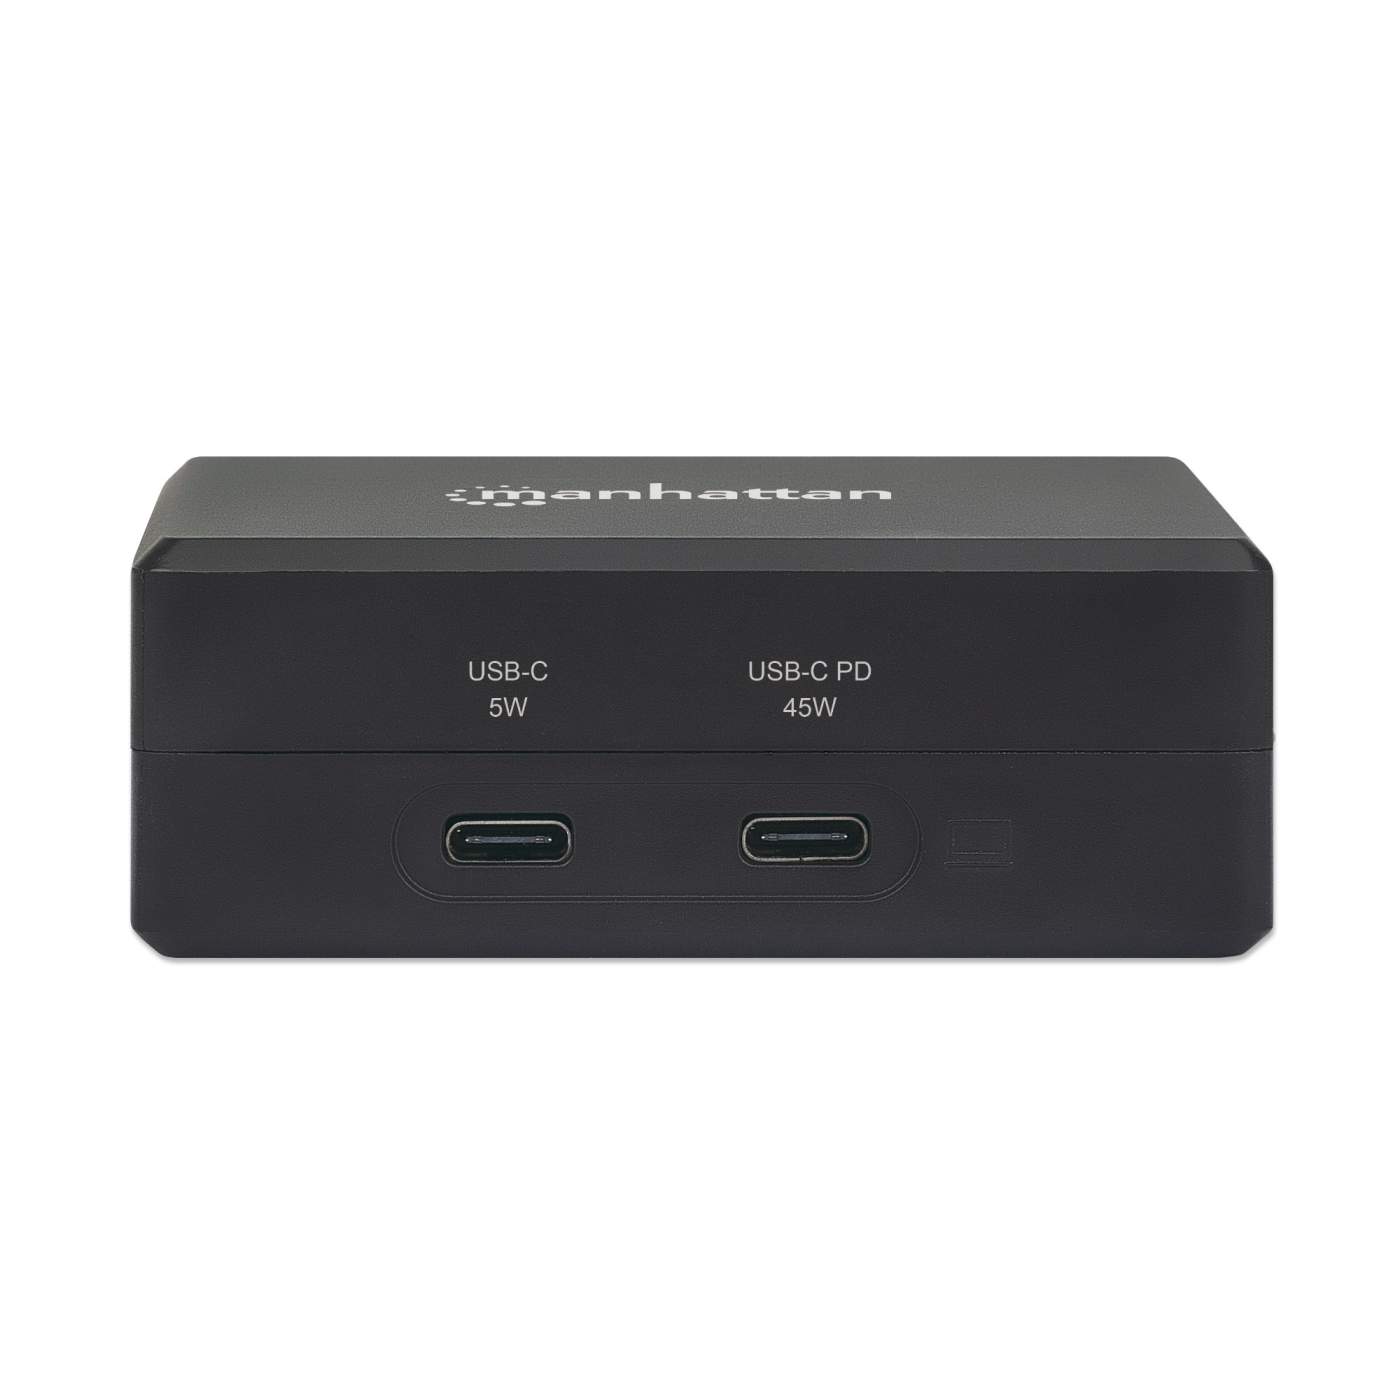 USB C PD Charger 45 W and USB C to HDMI Multiport Dock with 2 x USB C and 2 x USB A ports, compact travel docking station with internal power supply, for Chomebook, Surface, Laptop Image 4